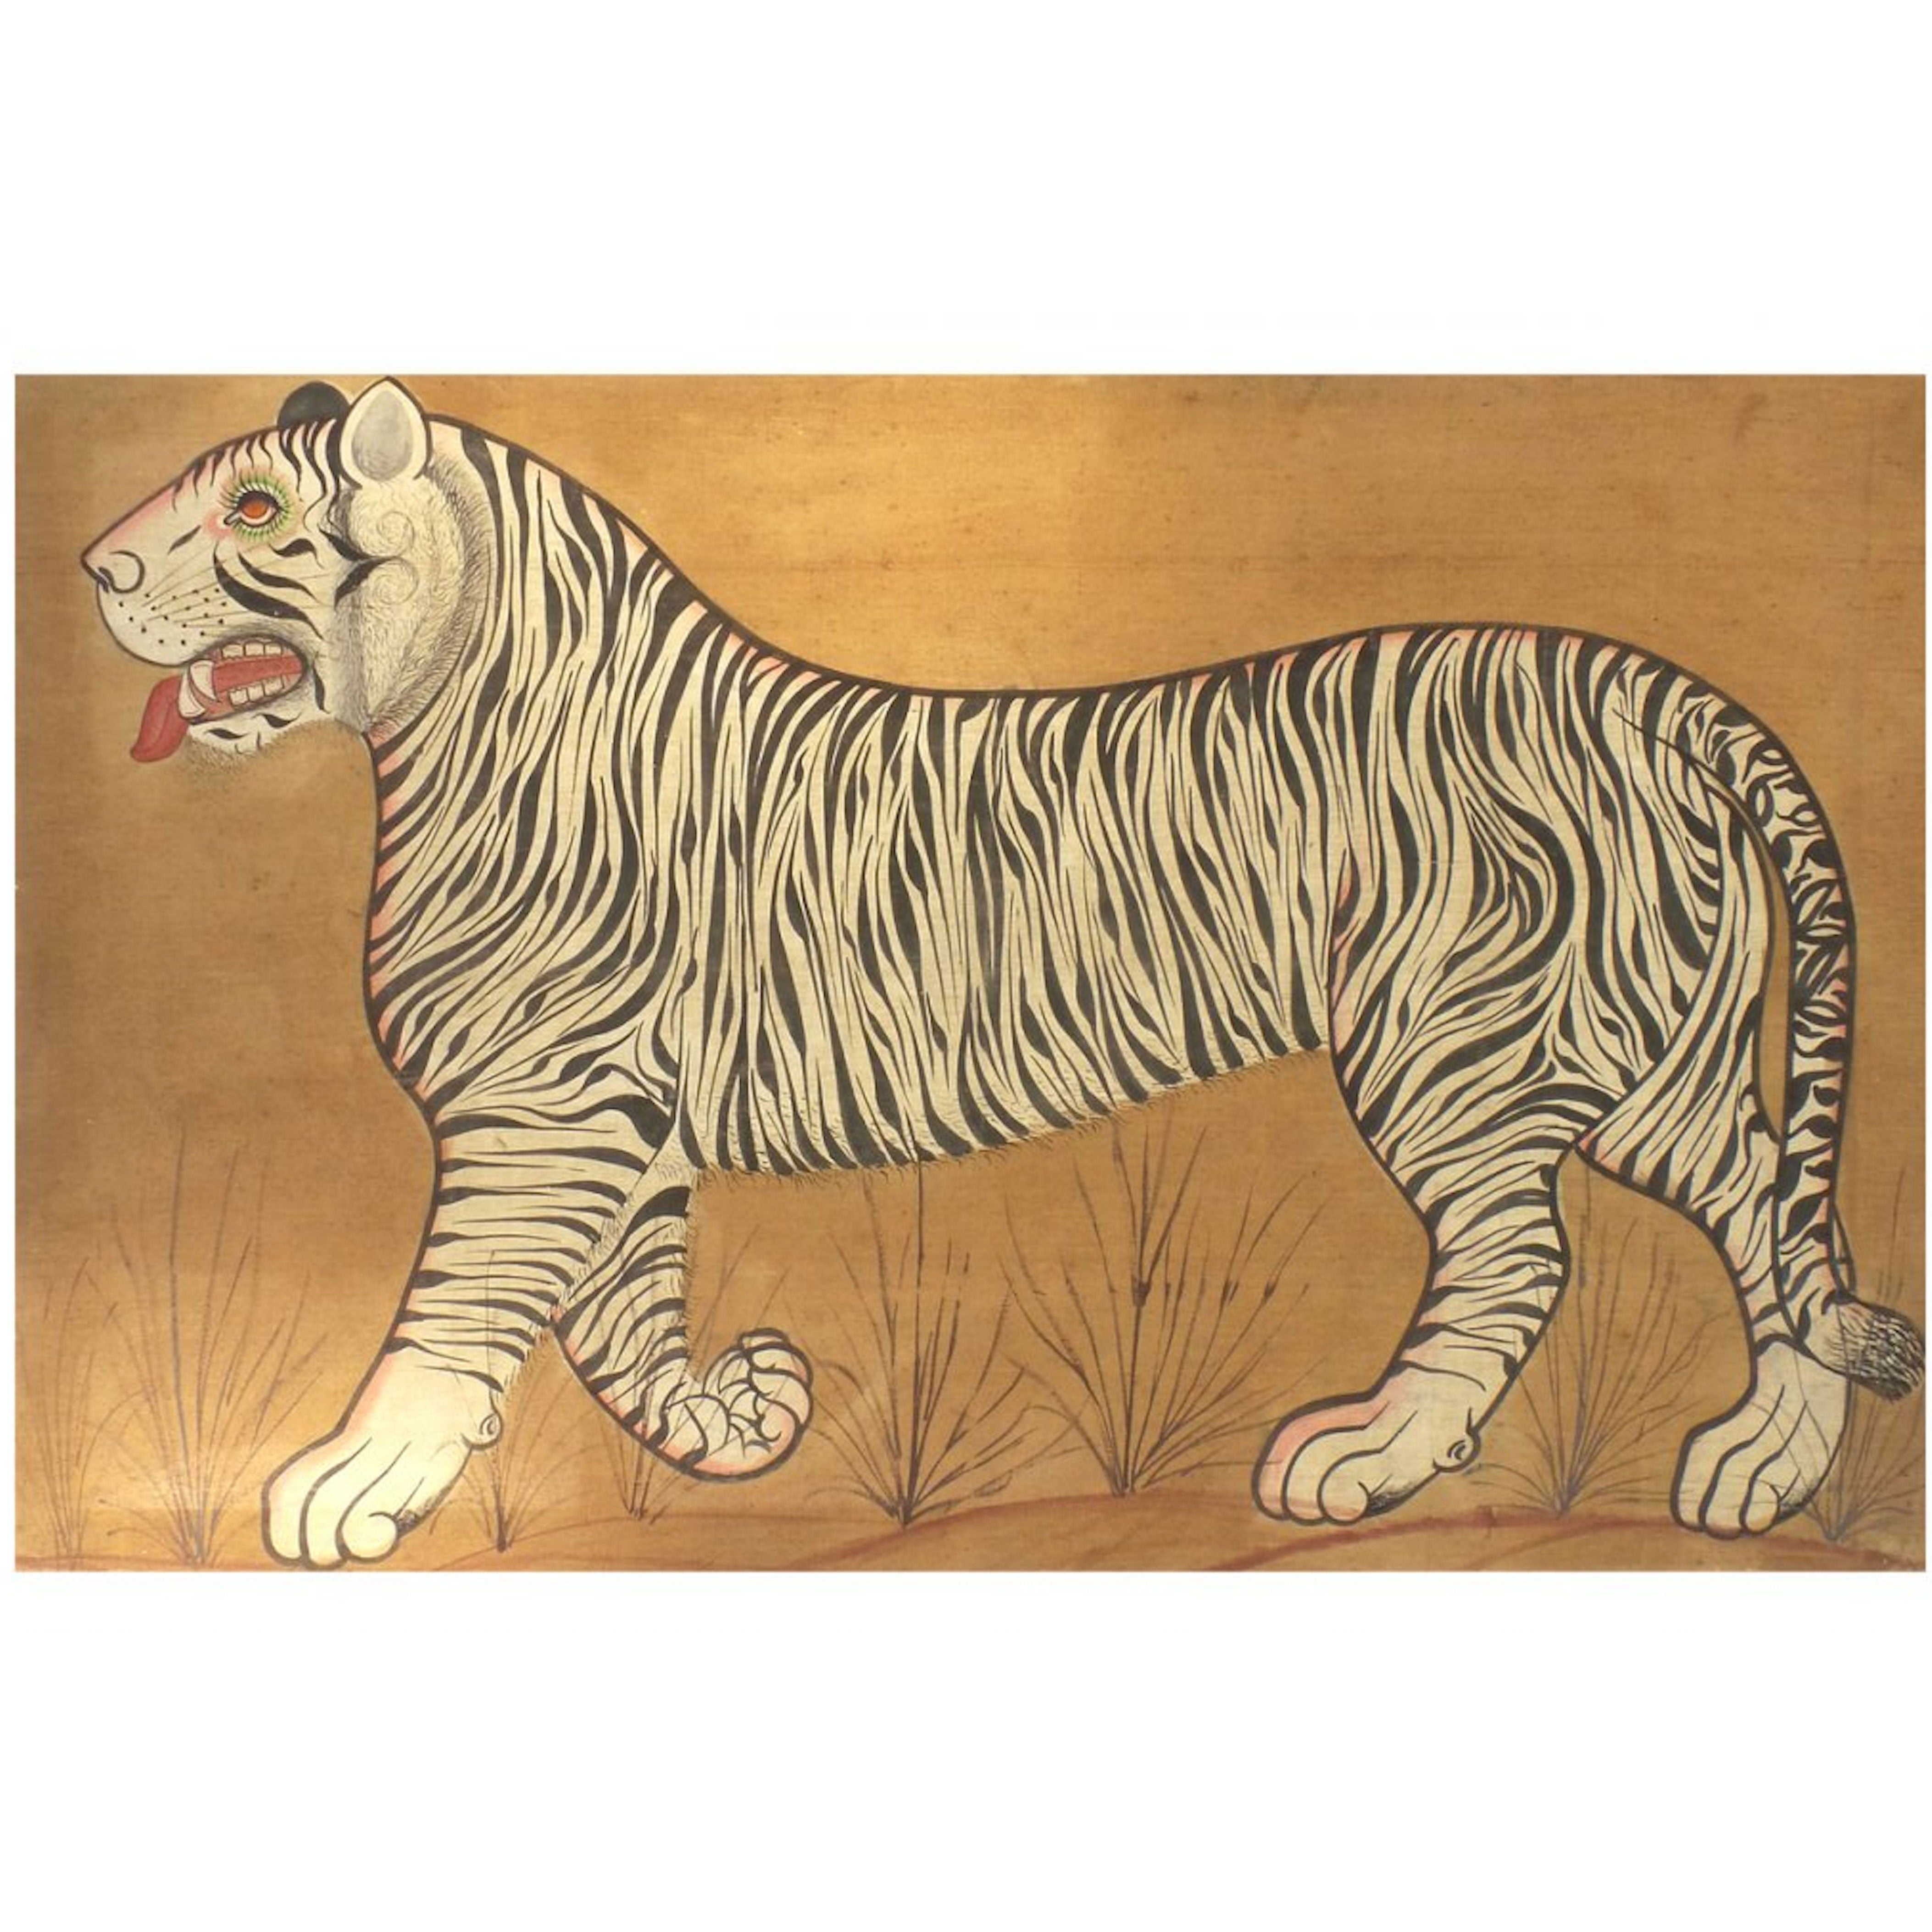 Indian Tiger Painting on Cloth